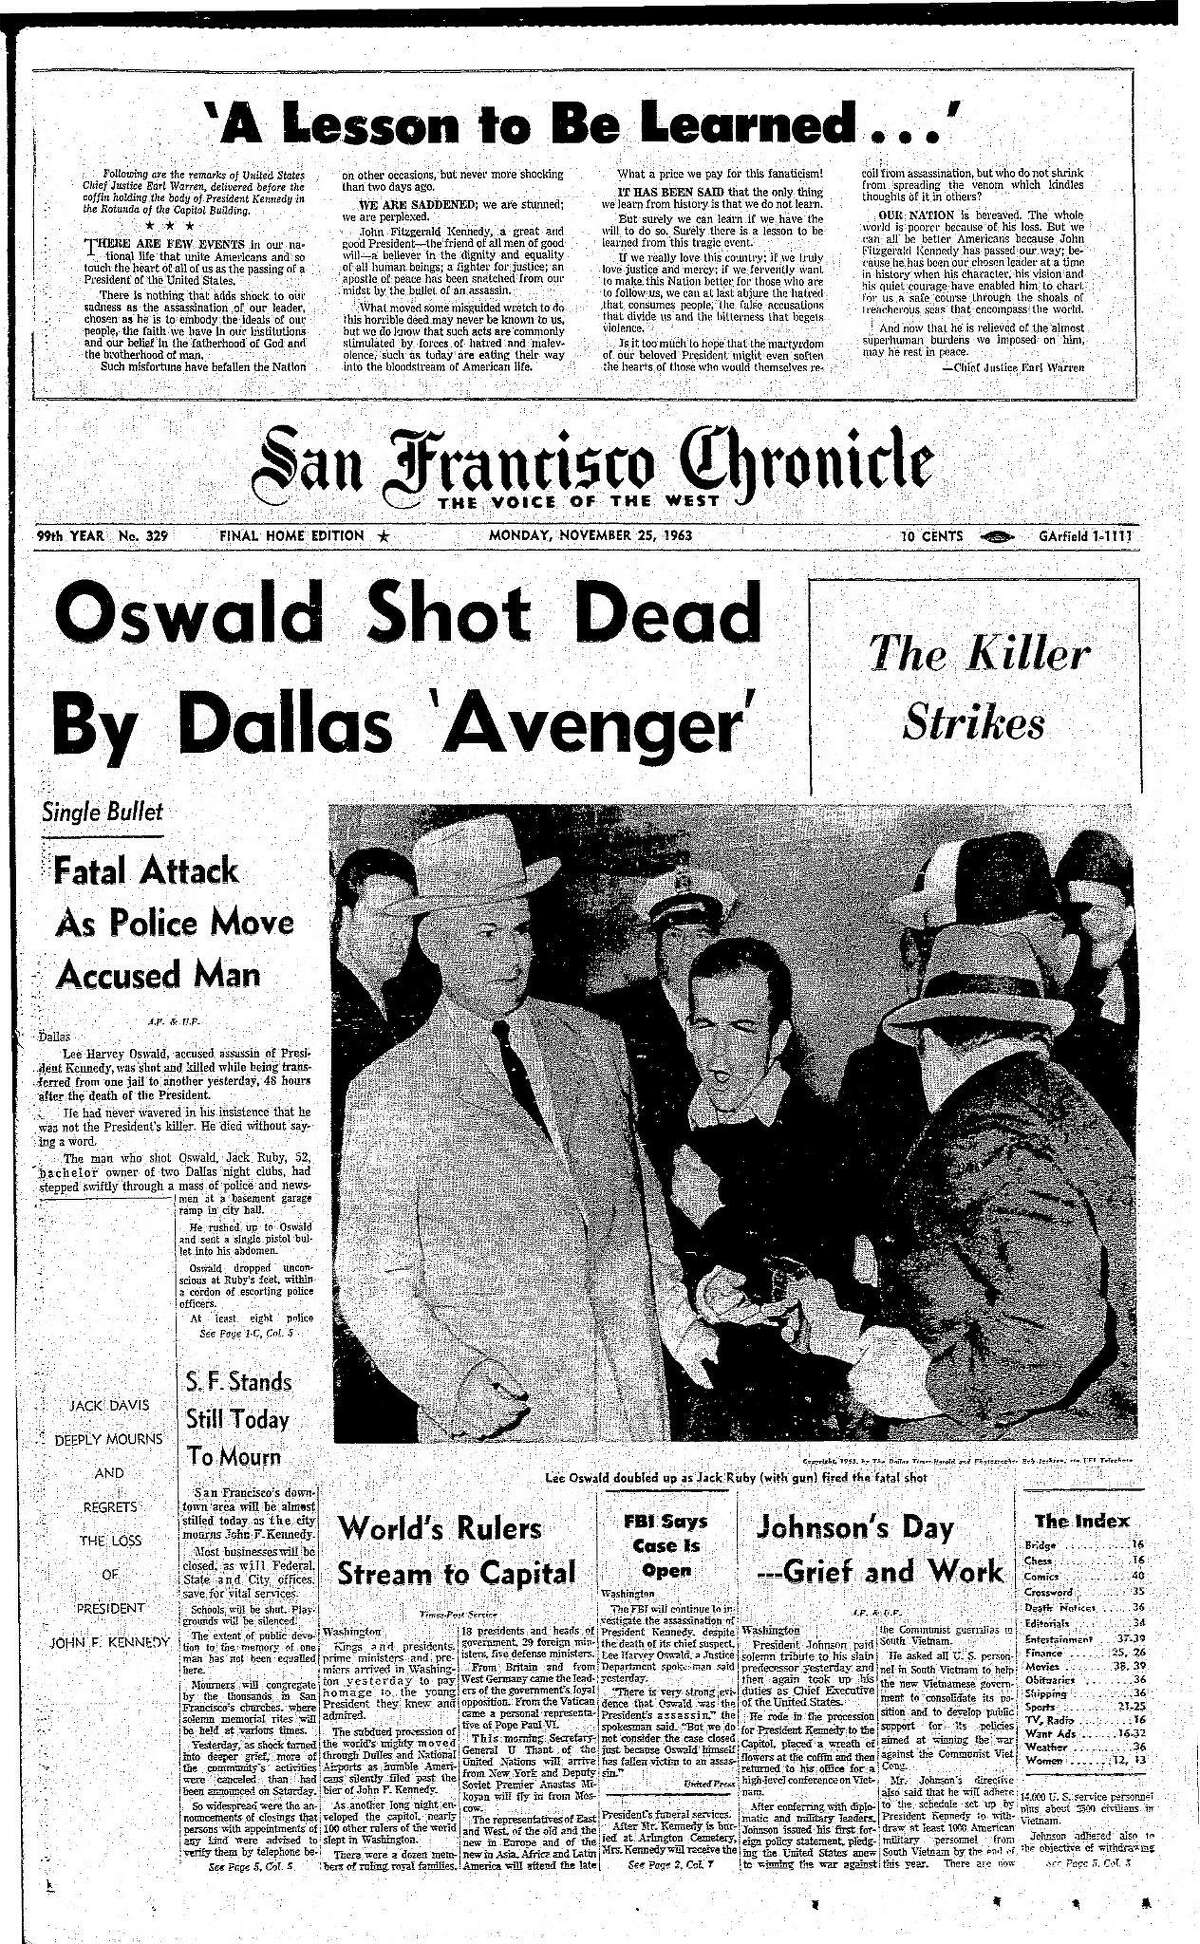 Chronicle Covers: The shooting of Lee Harvey Oswald